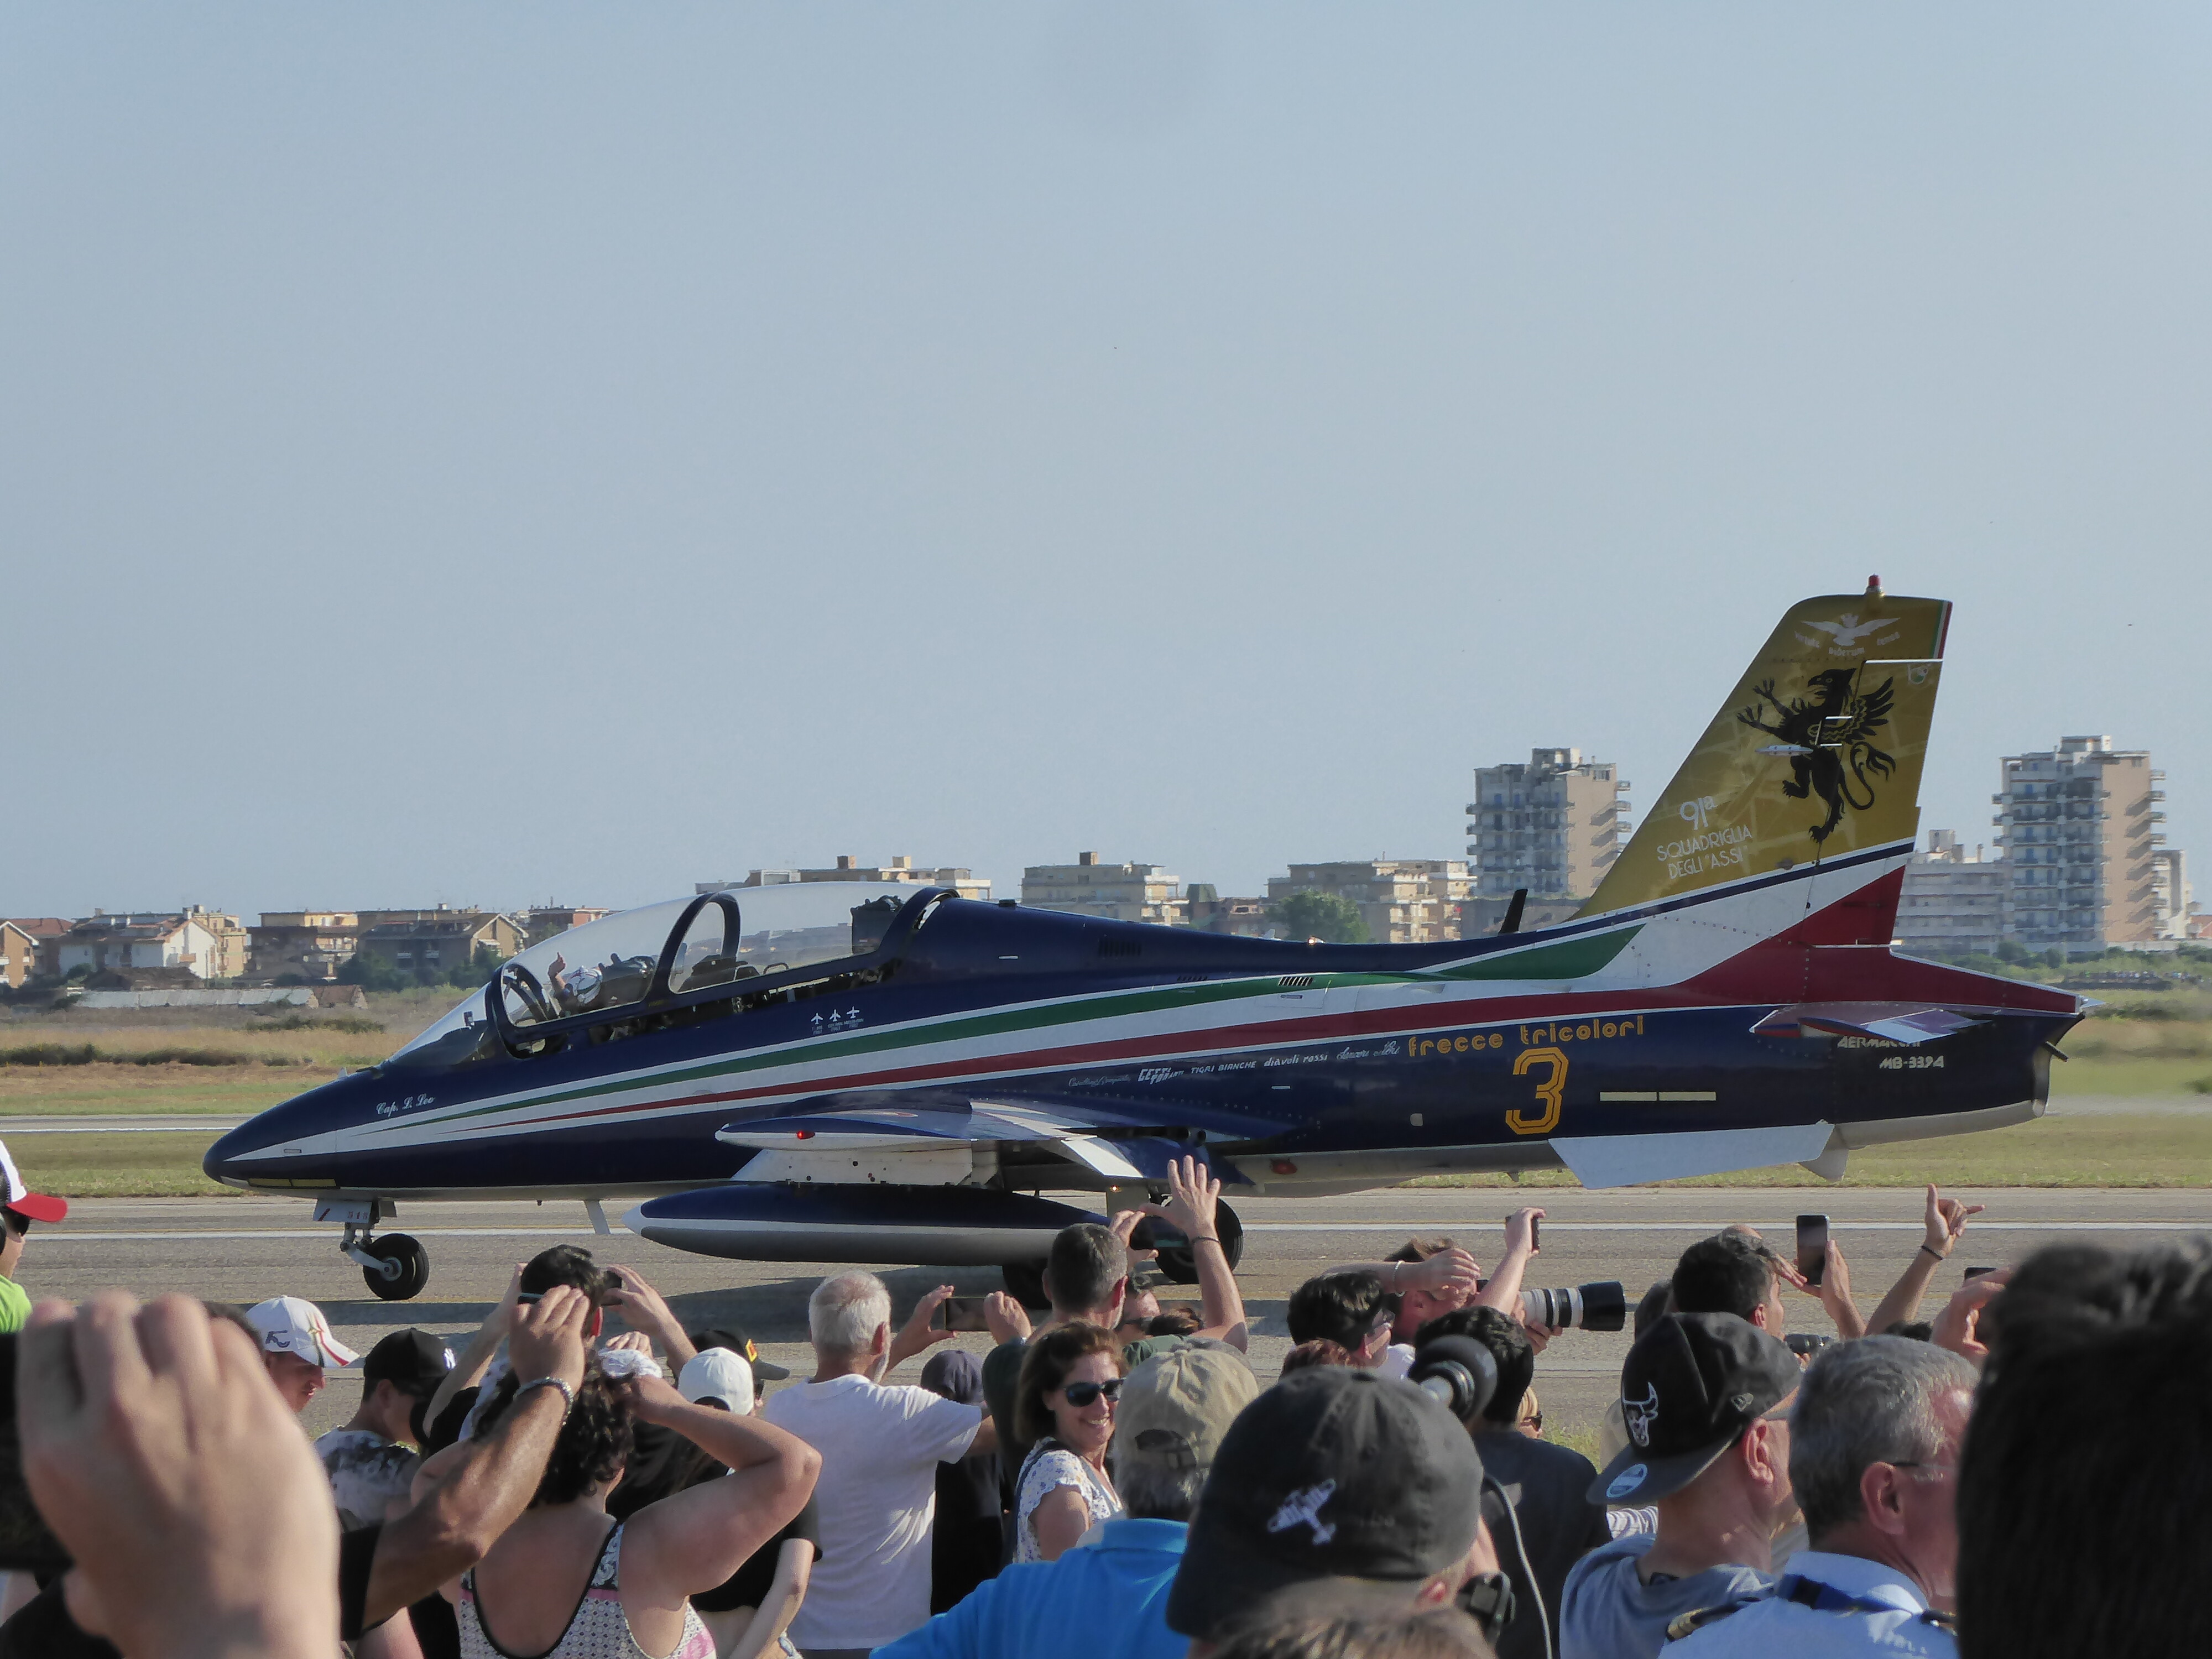 100th anniversary of the Italian Air Force - Frecce Tricolori - DCS: MB-339  - ED Forums